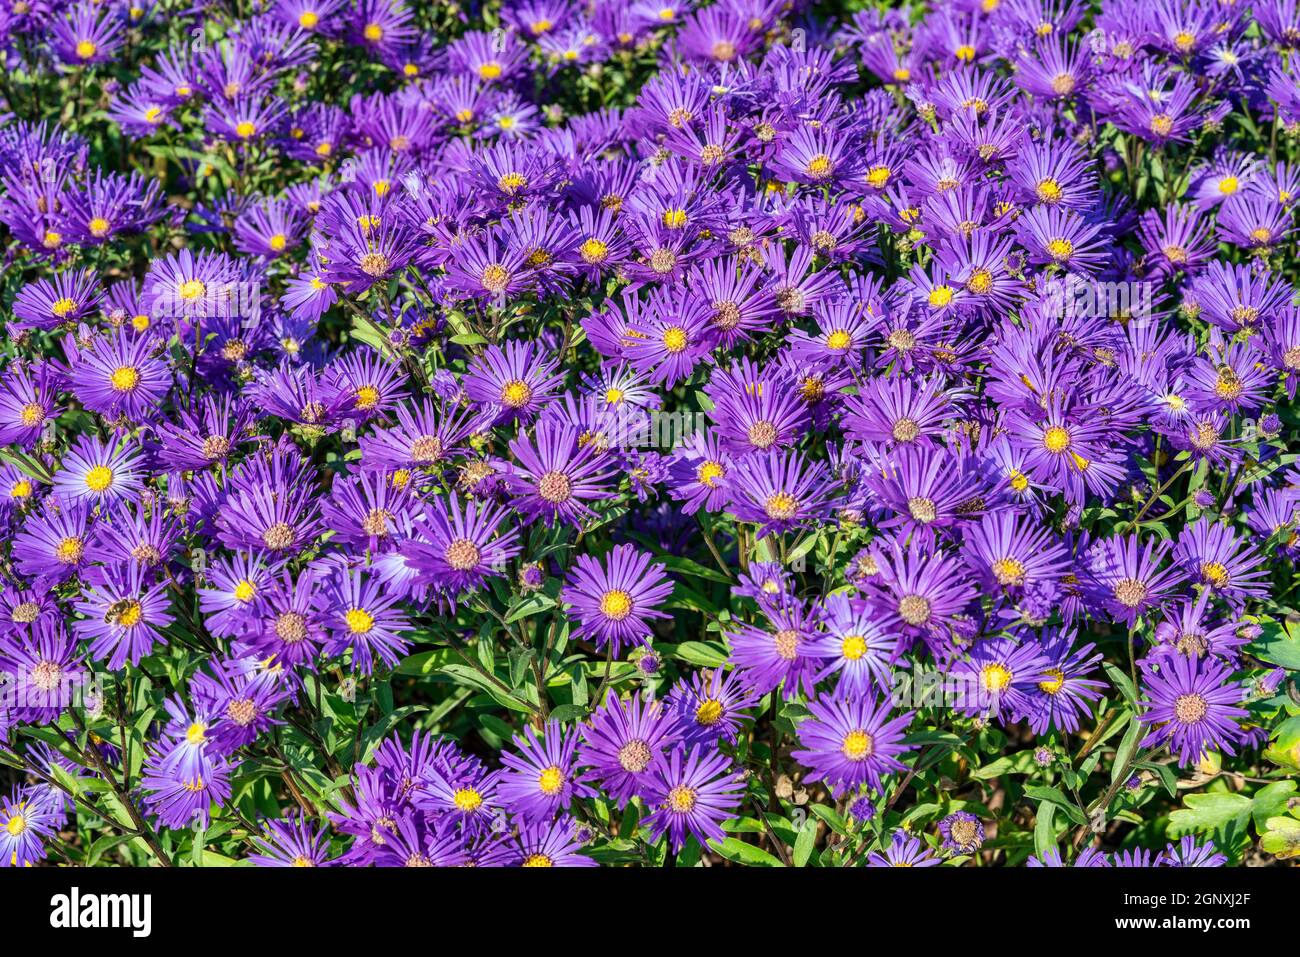 Aster amellus 'Veilchenkonigin' (Violet Queen) a purple blue herbaceous perennial summer autumn flower plant commonly known as Michaelmas daisy, stock Stock Photo